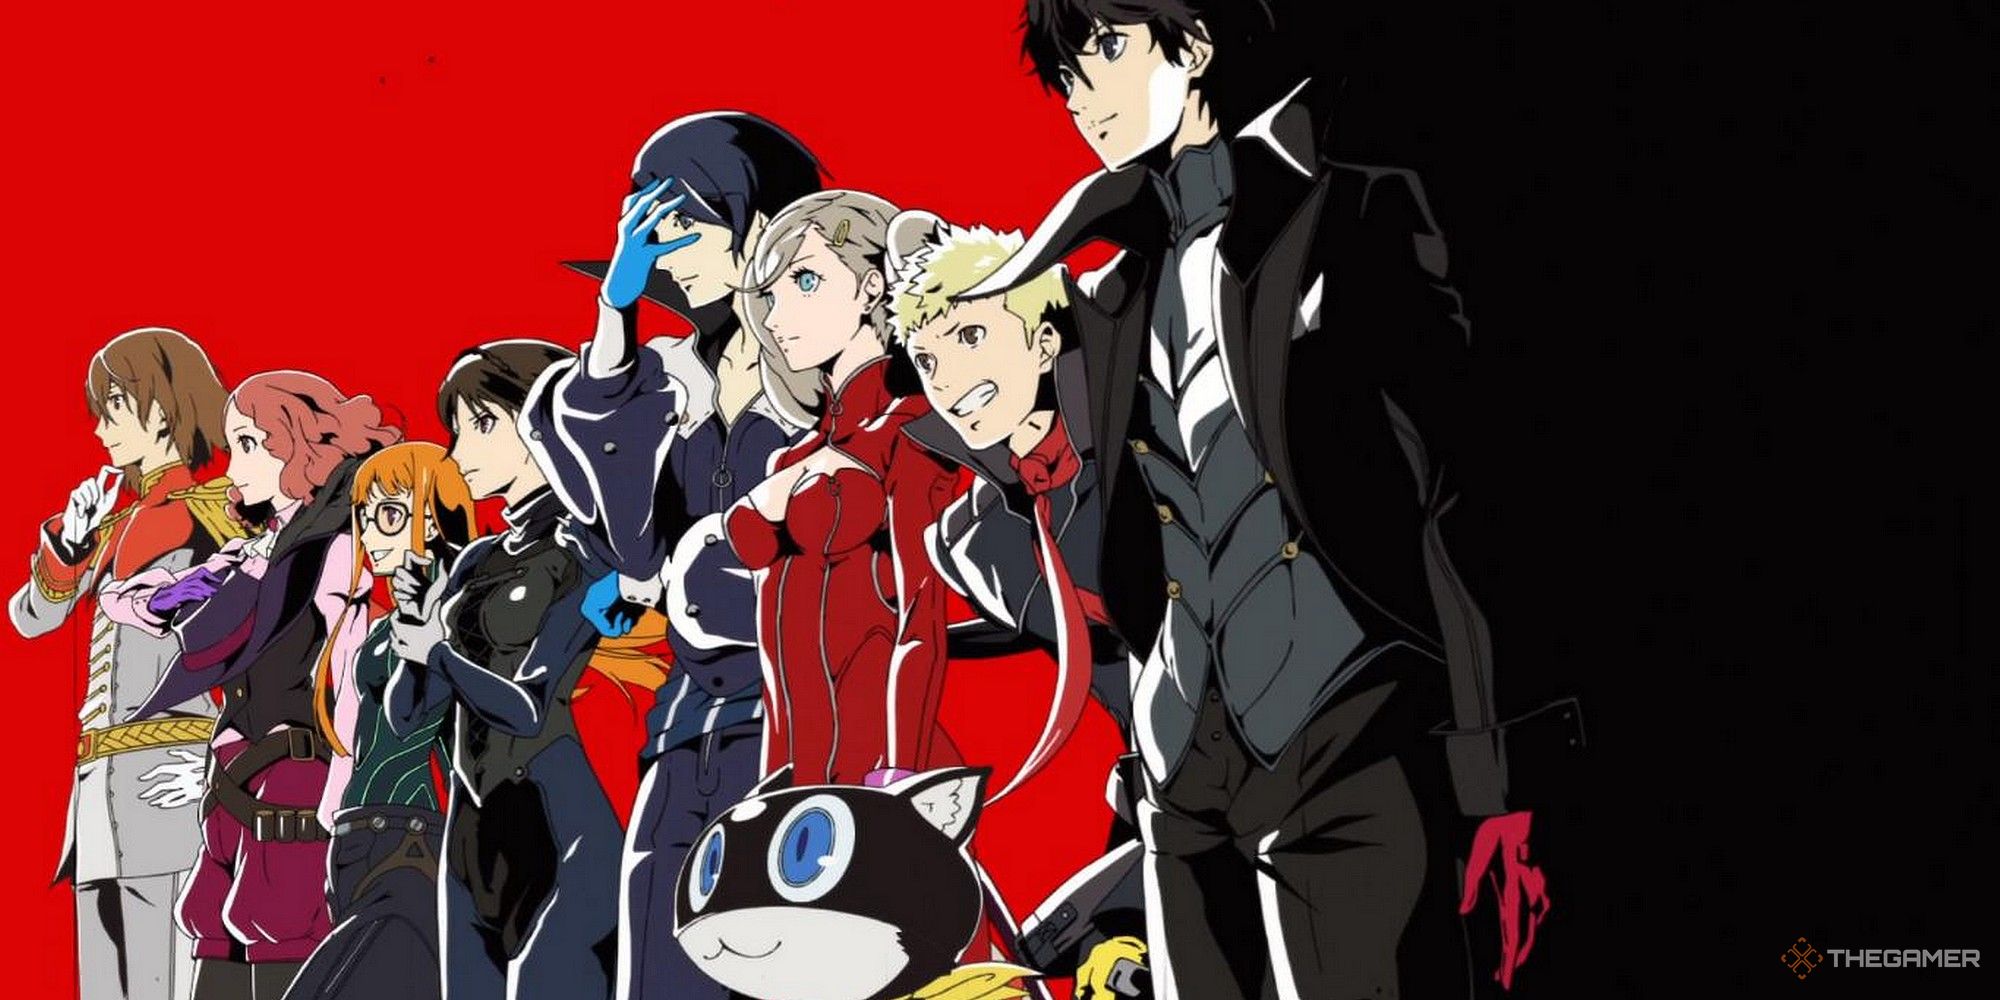 Persona 5 Prototype Played By Fans, Reveals More Cut Content